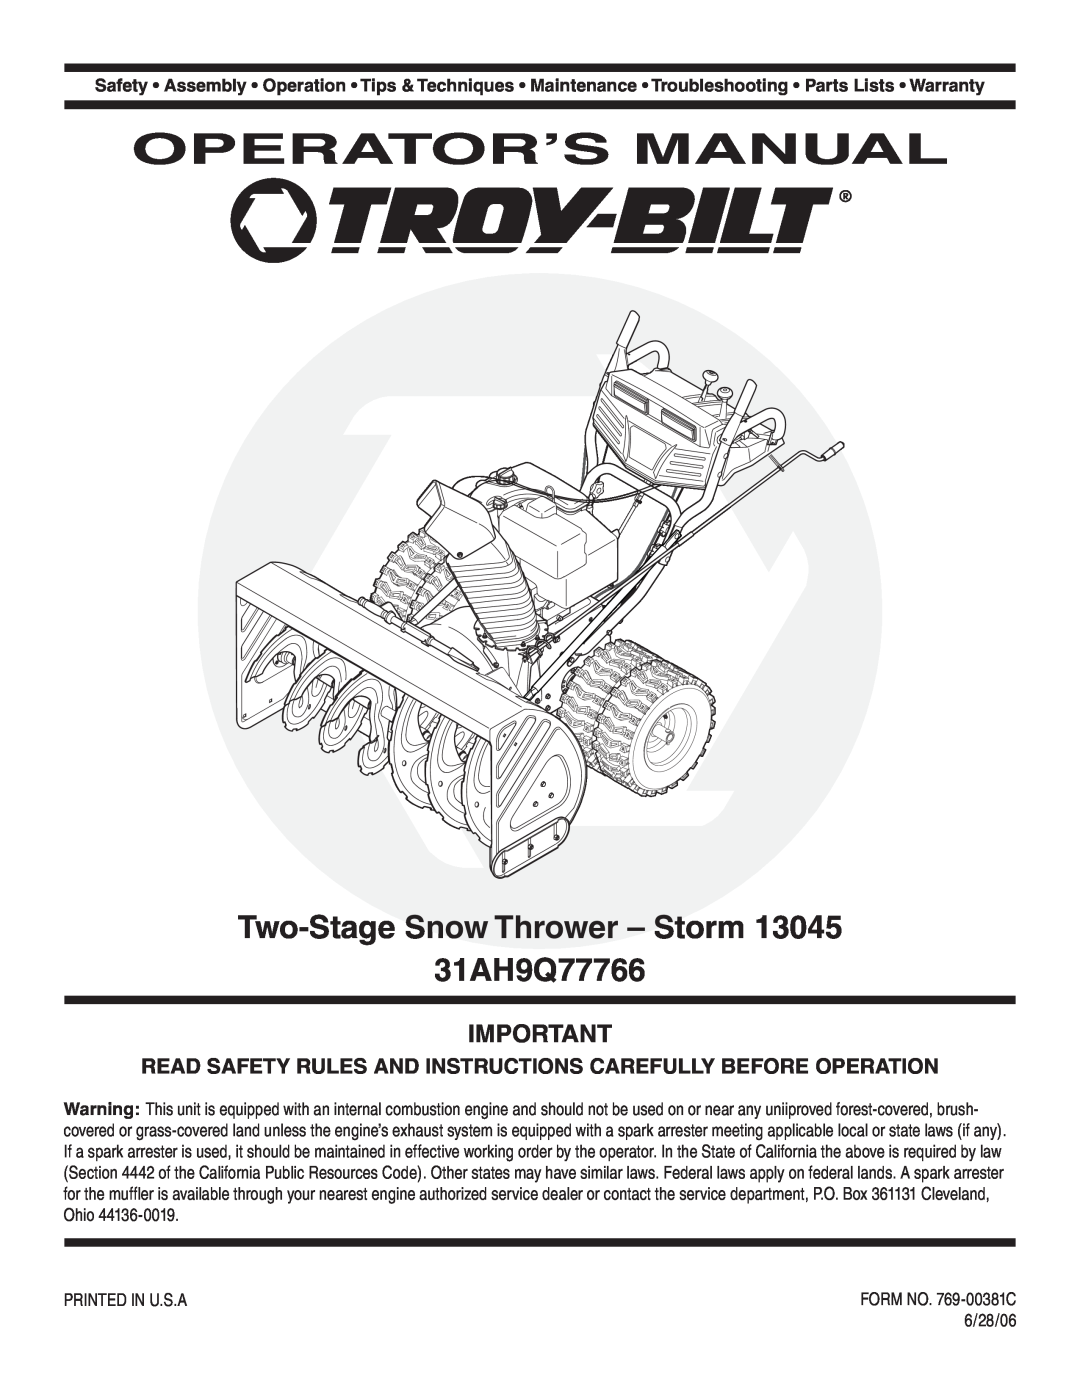 Troy-Bilt warranty Operator’S Manual, Two-Stage Snow Thrower - Storm 31AH9Q77766 